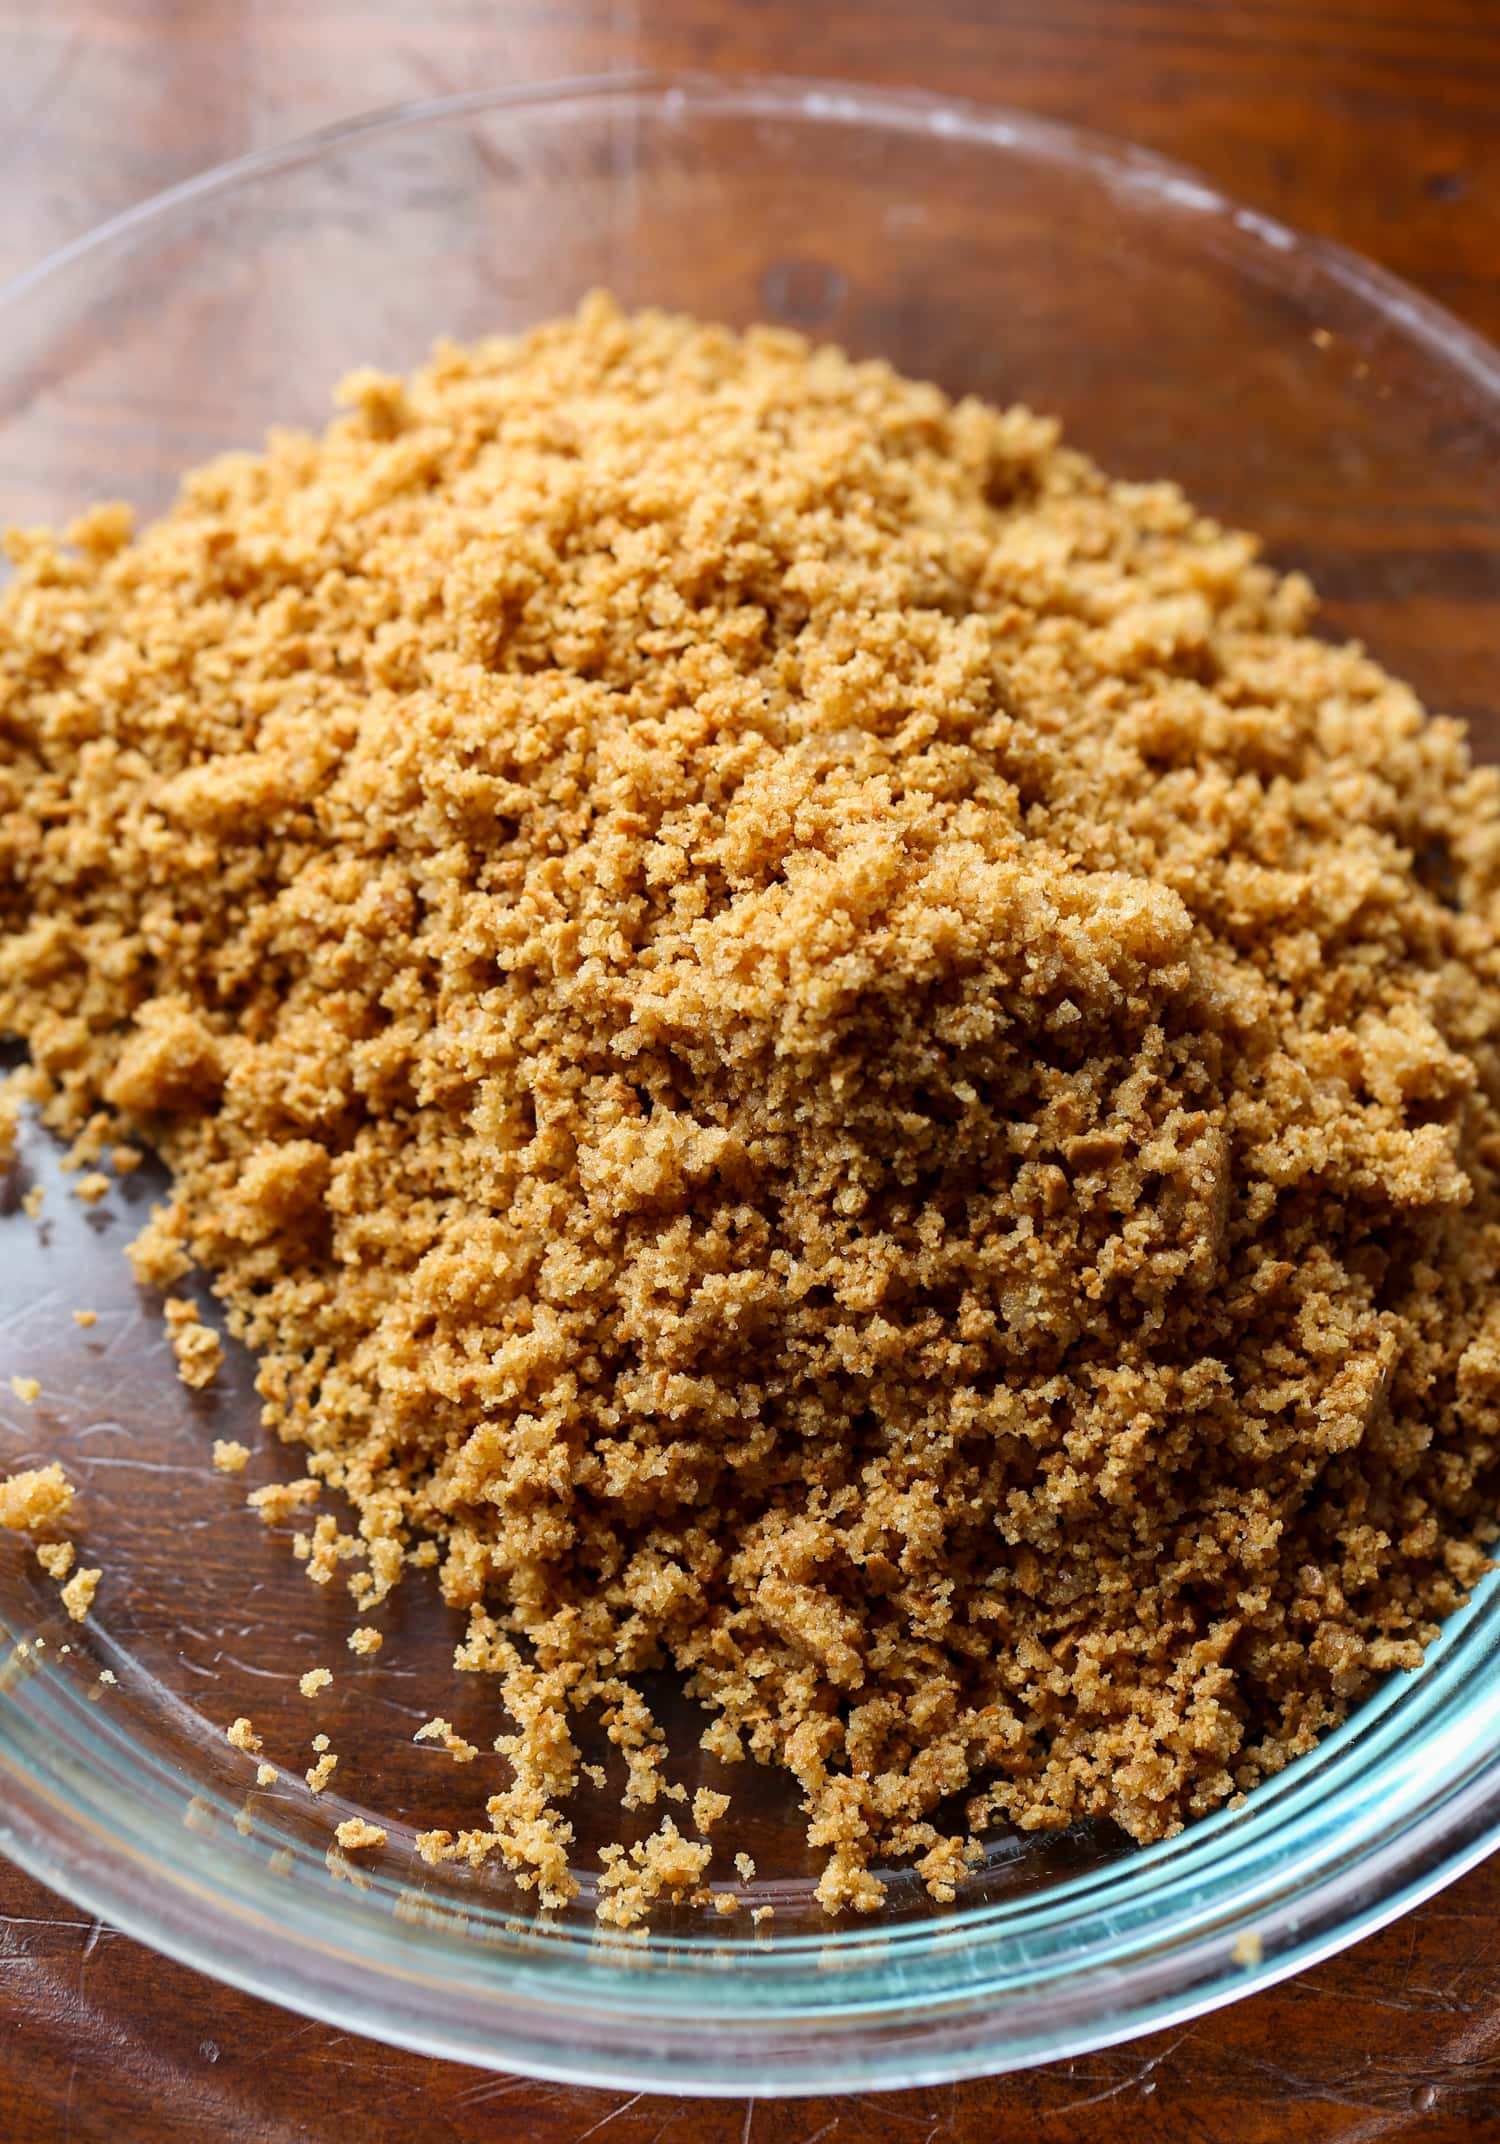 Crushed graham cracker crumbs in a plate.